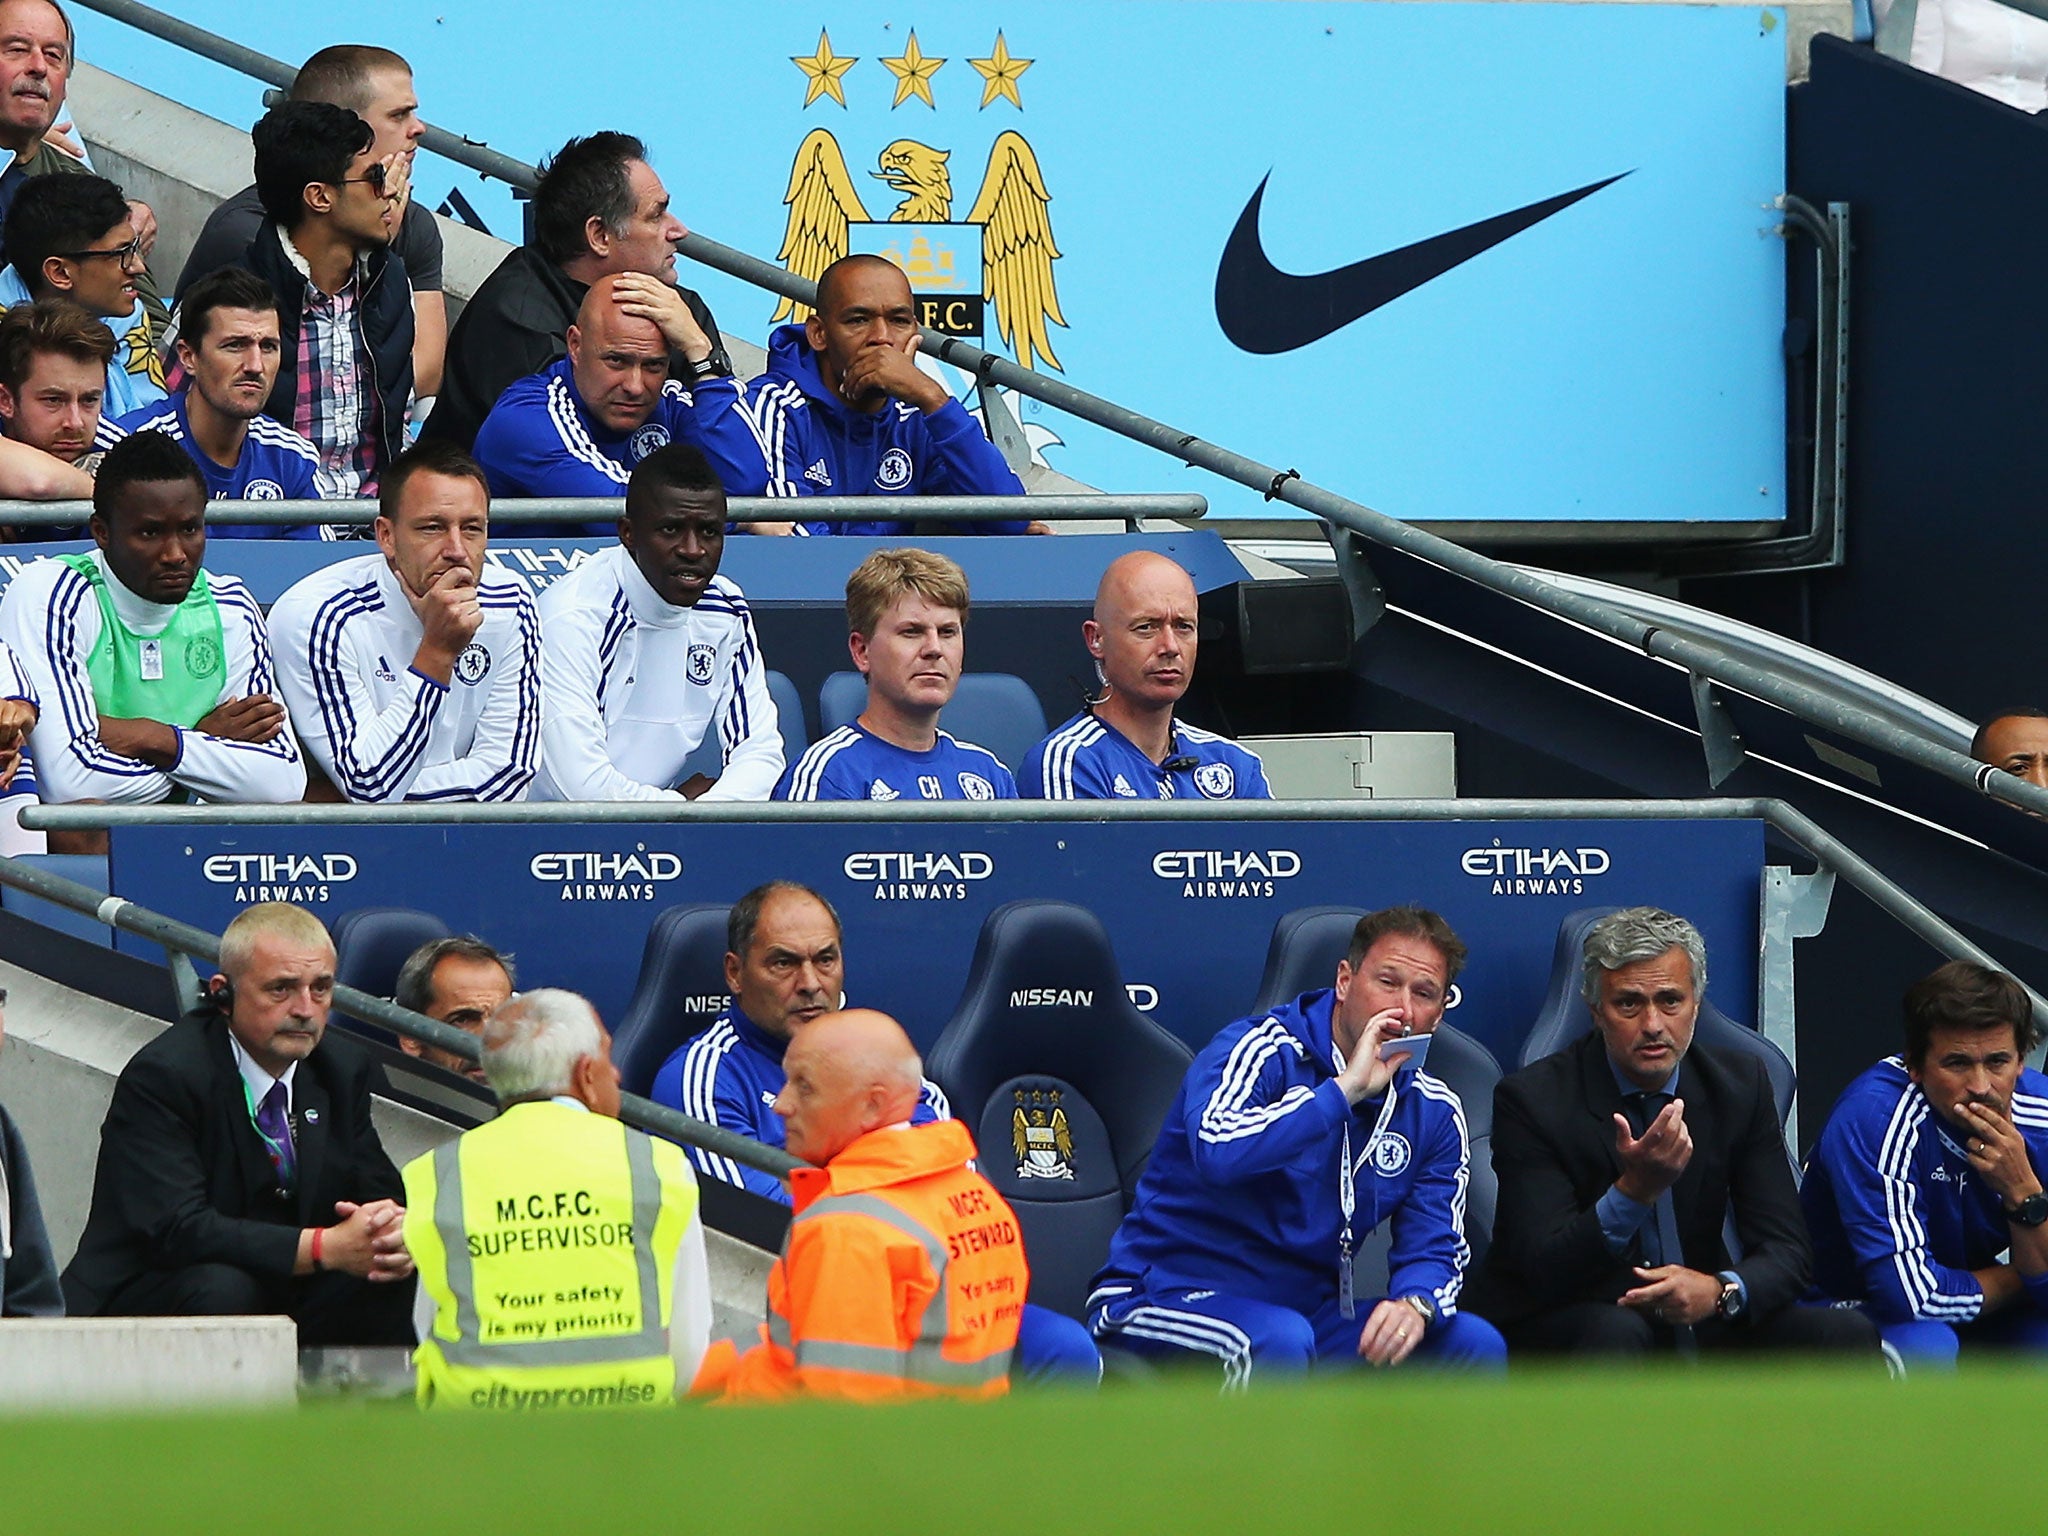 John Terry sits on the bench behind Jose Mourinho after being substituted